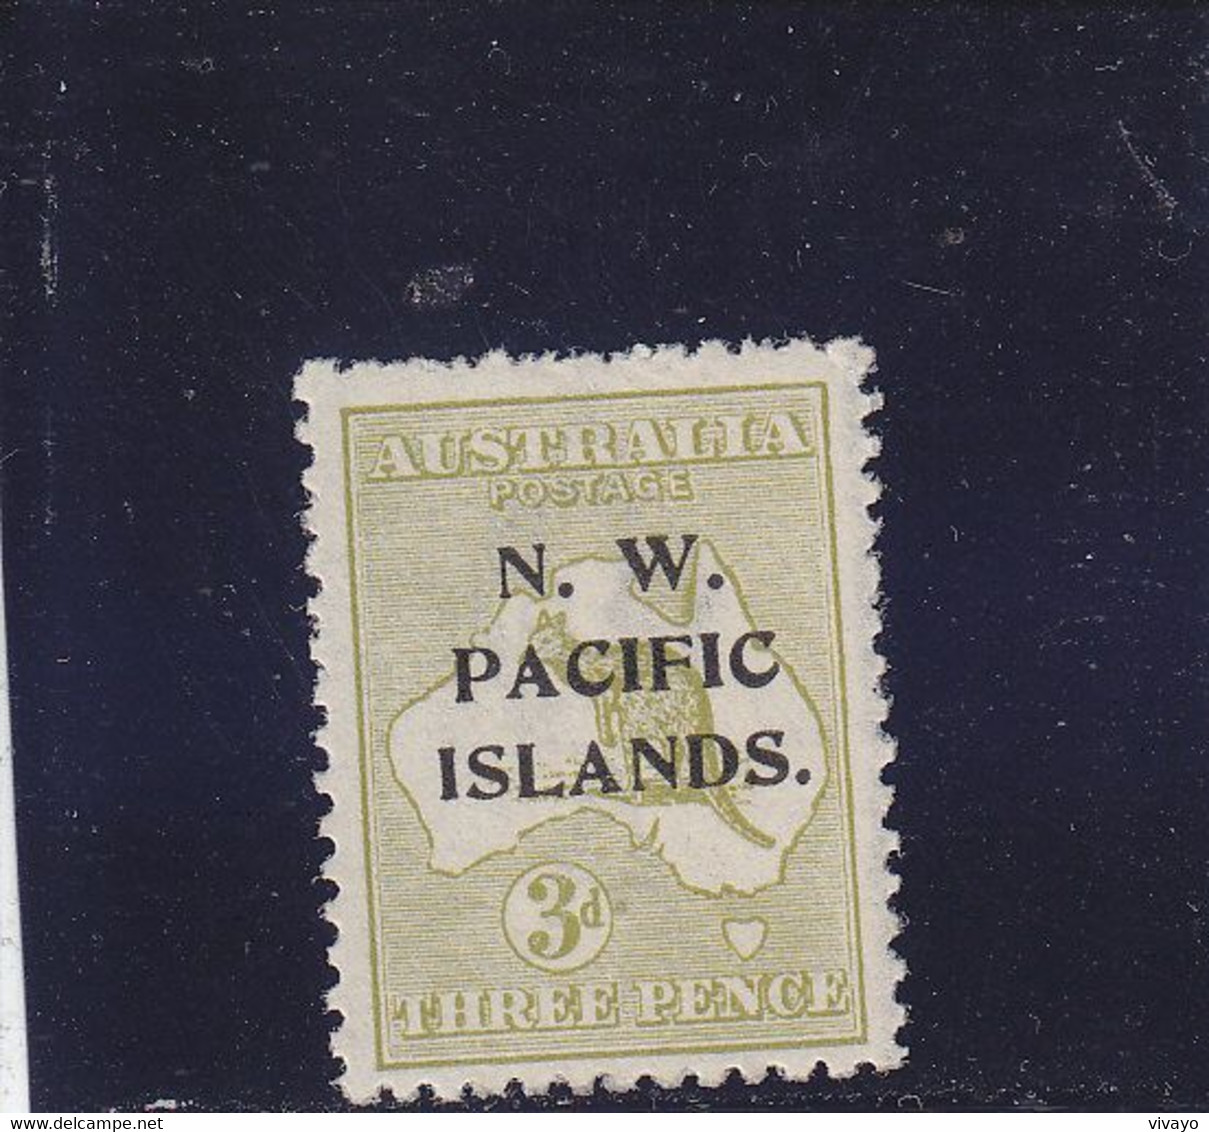 NORTH WEST PACIFIC ISLANDS - NWPI - 1918 - ** / MNH - KANGAROO OVERPRINTED - Mi. 14 I  - PERFECT CONDITION - Mint Stamps